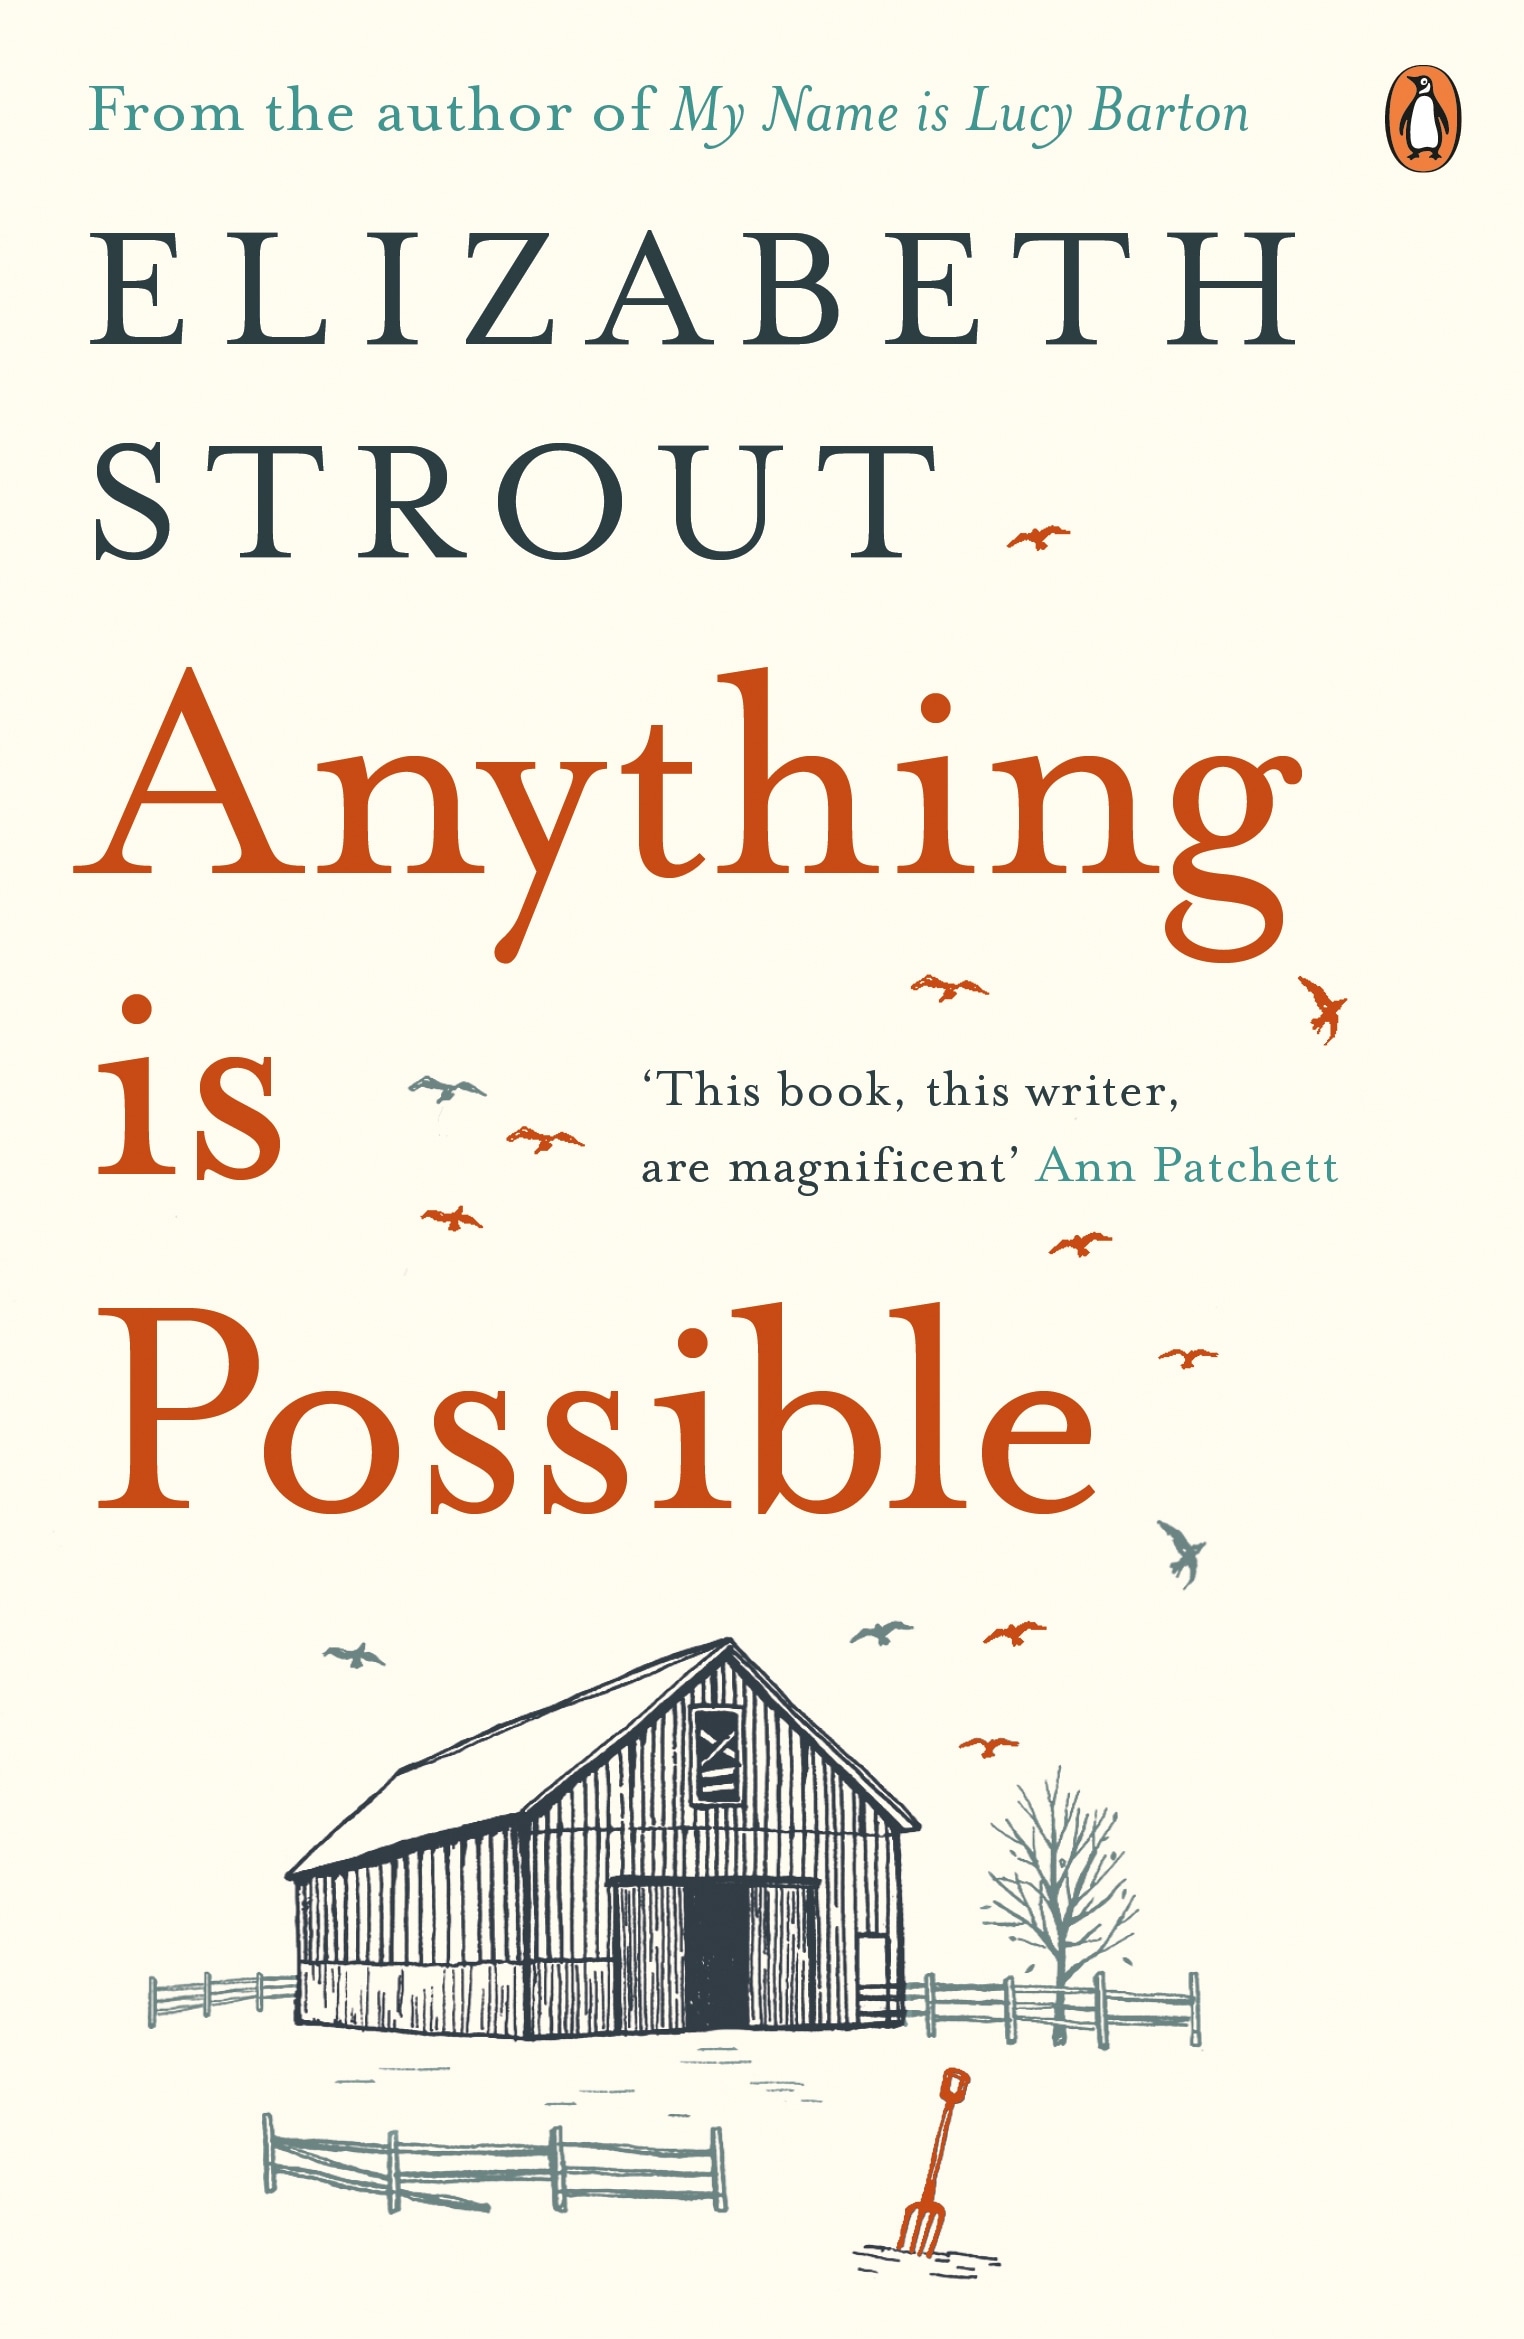 Book “Anything is Possible” by Elizabeth Strout — March 1, 2018